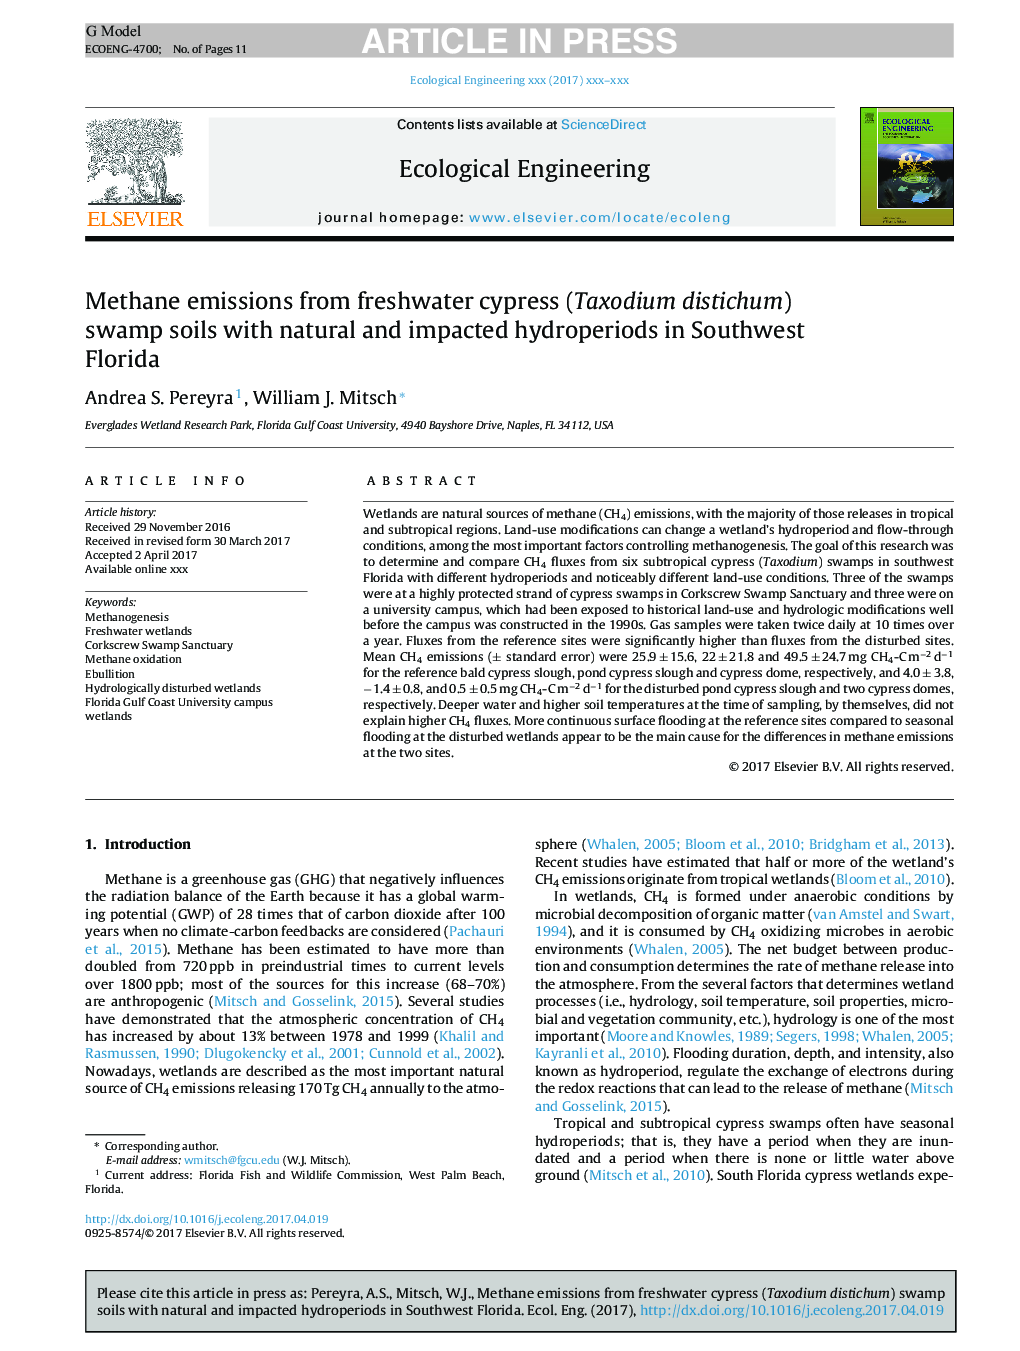 Methane emissions from freshwater cypress (Taxodium distichum) swamp soils with natural and impacted hydroperiods in Southwest Florida